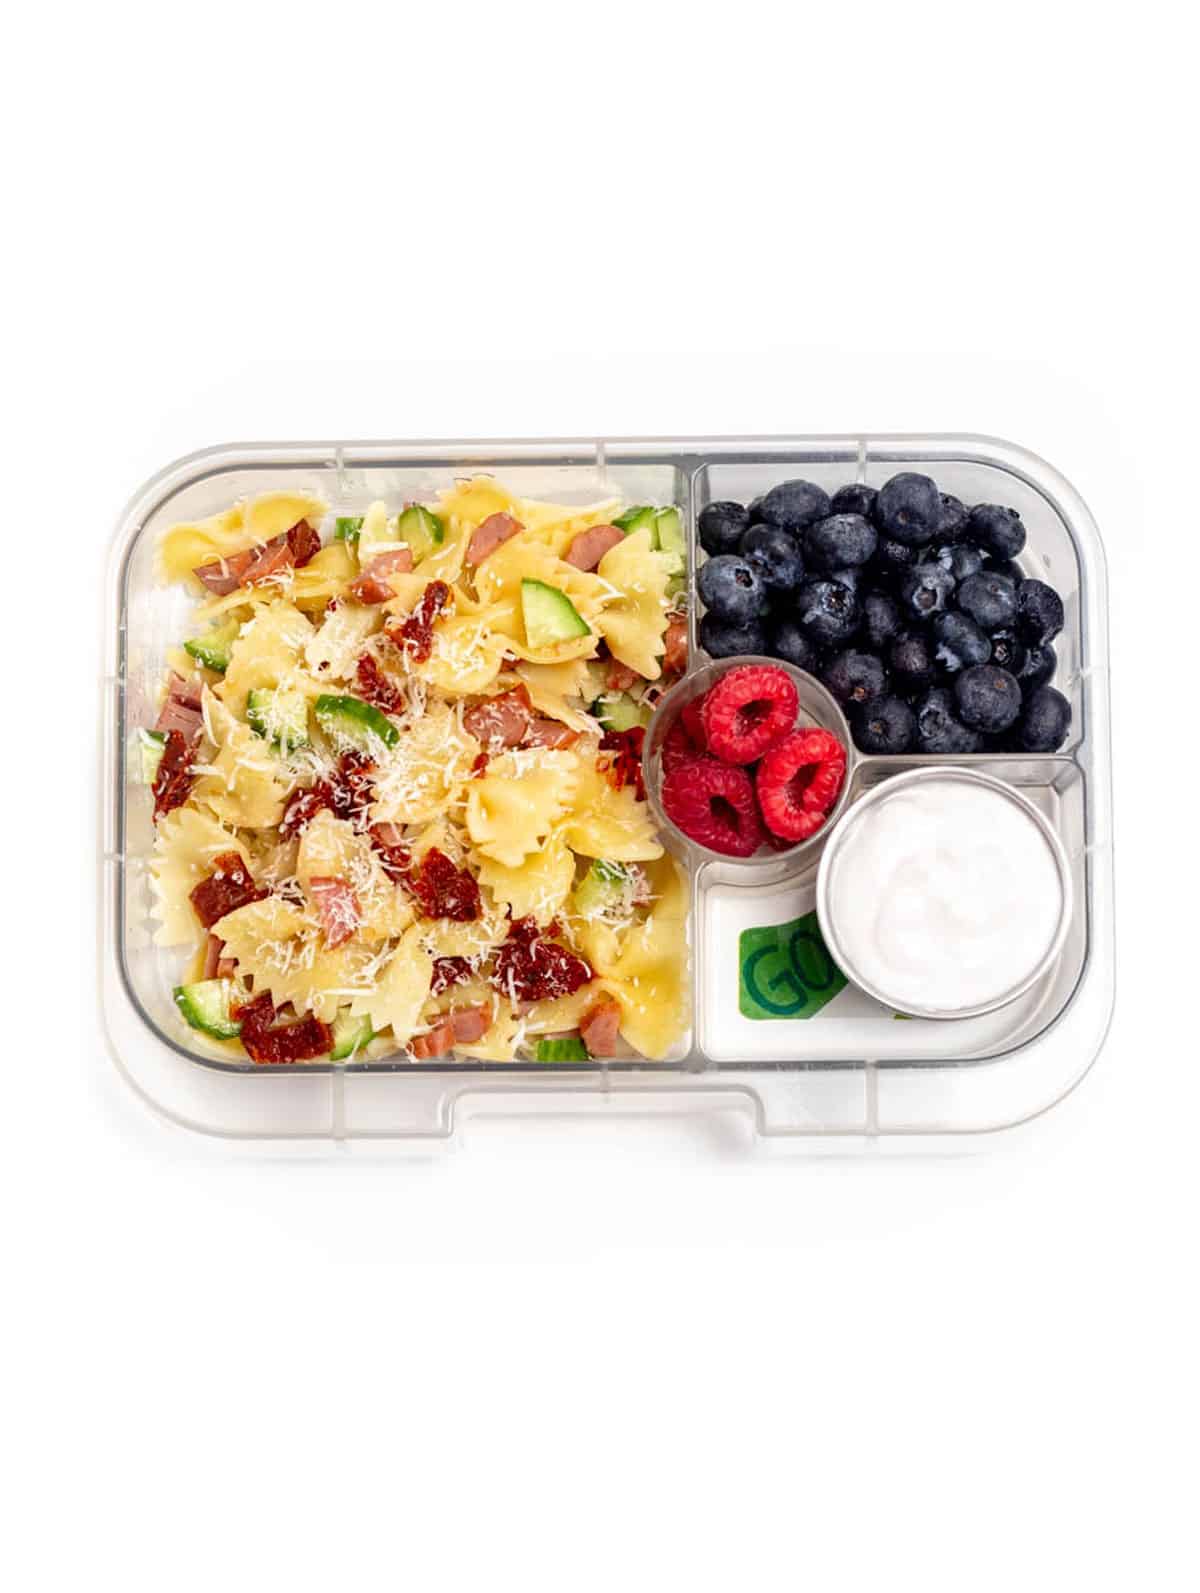 A lunch box with pasta salad, blueberries, raspberries and yogurt.